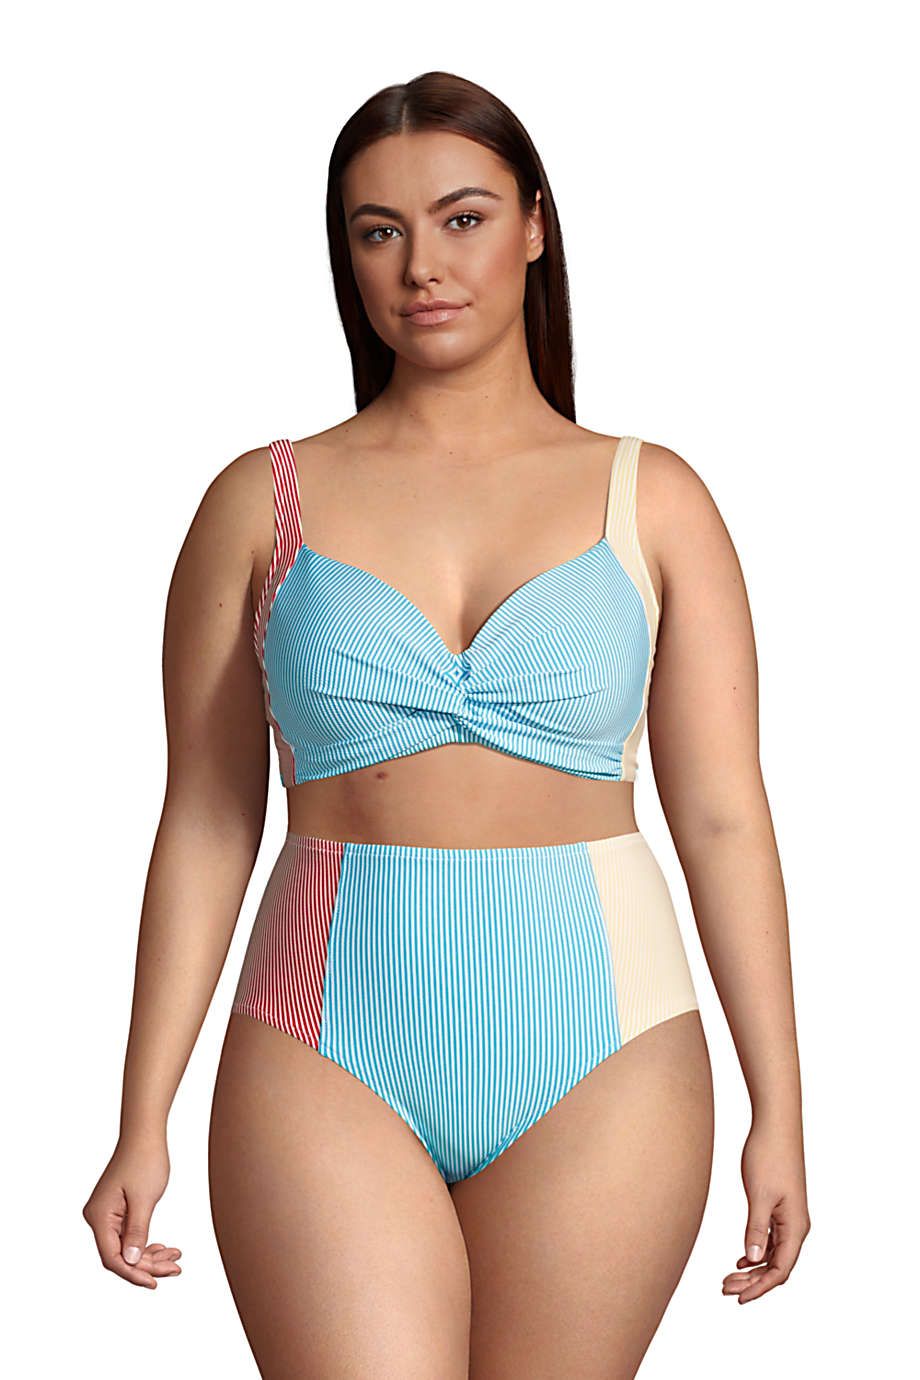  Bathing Suit For Small Chest Women